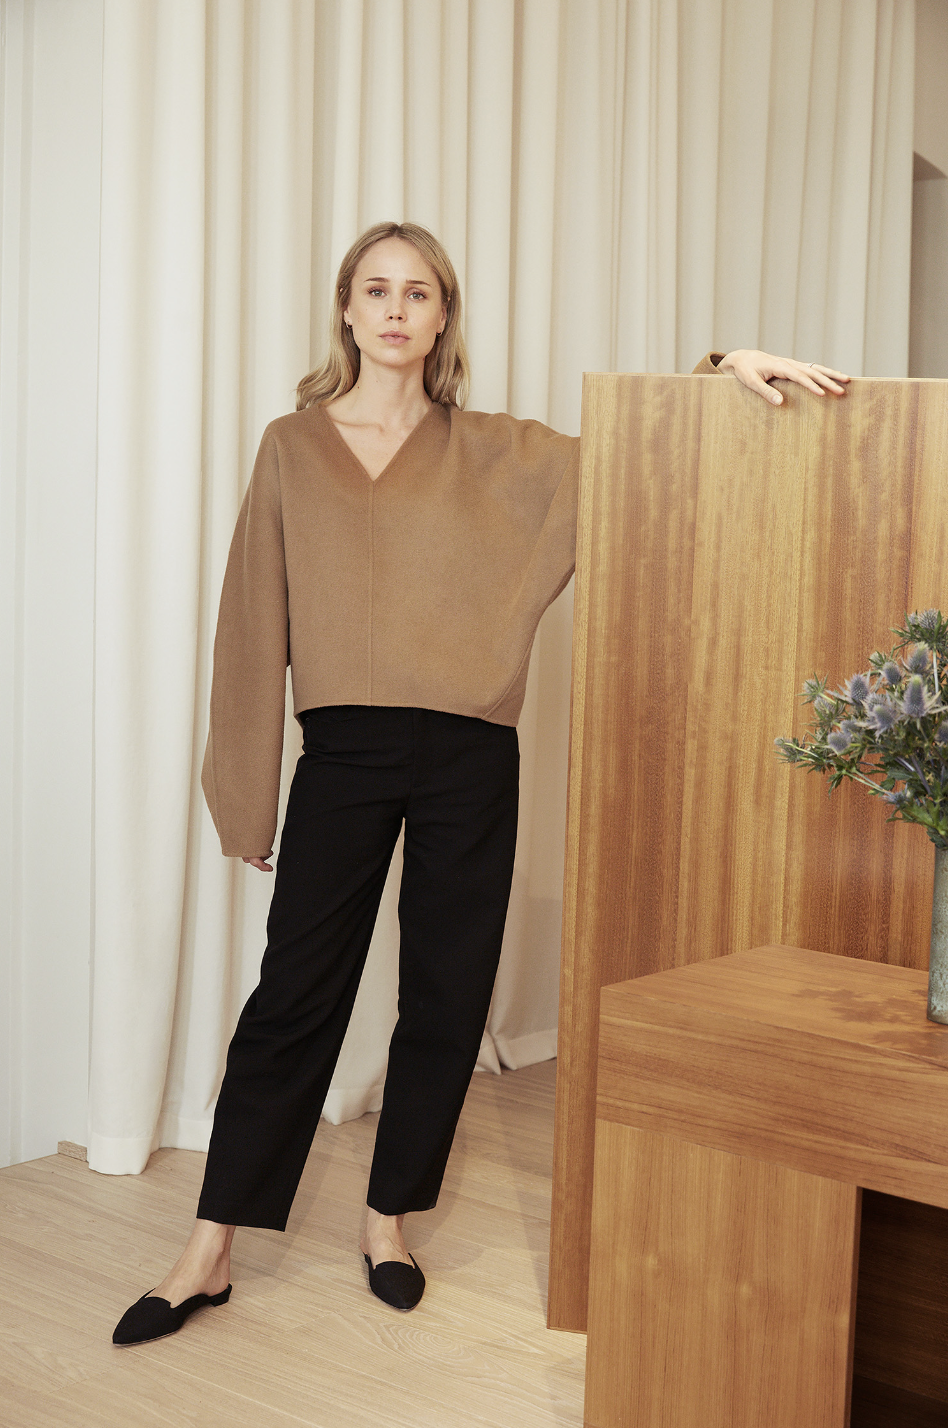 3-Piece Office Outfit for Spring — Elin Kling in a camel v-neck sweater, black pants, and black mule flats.